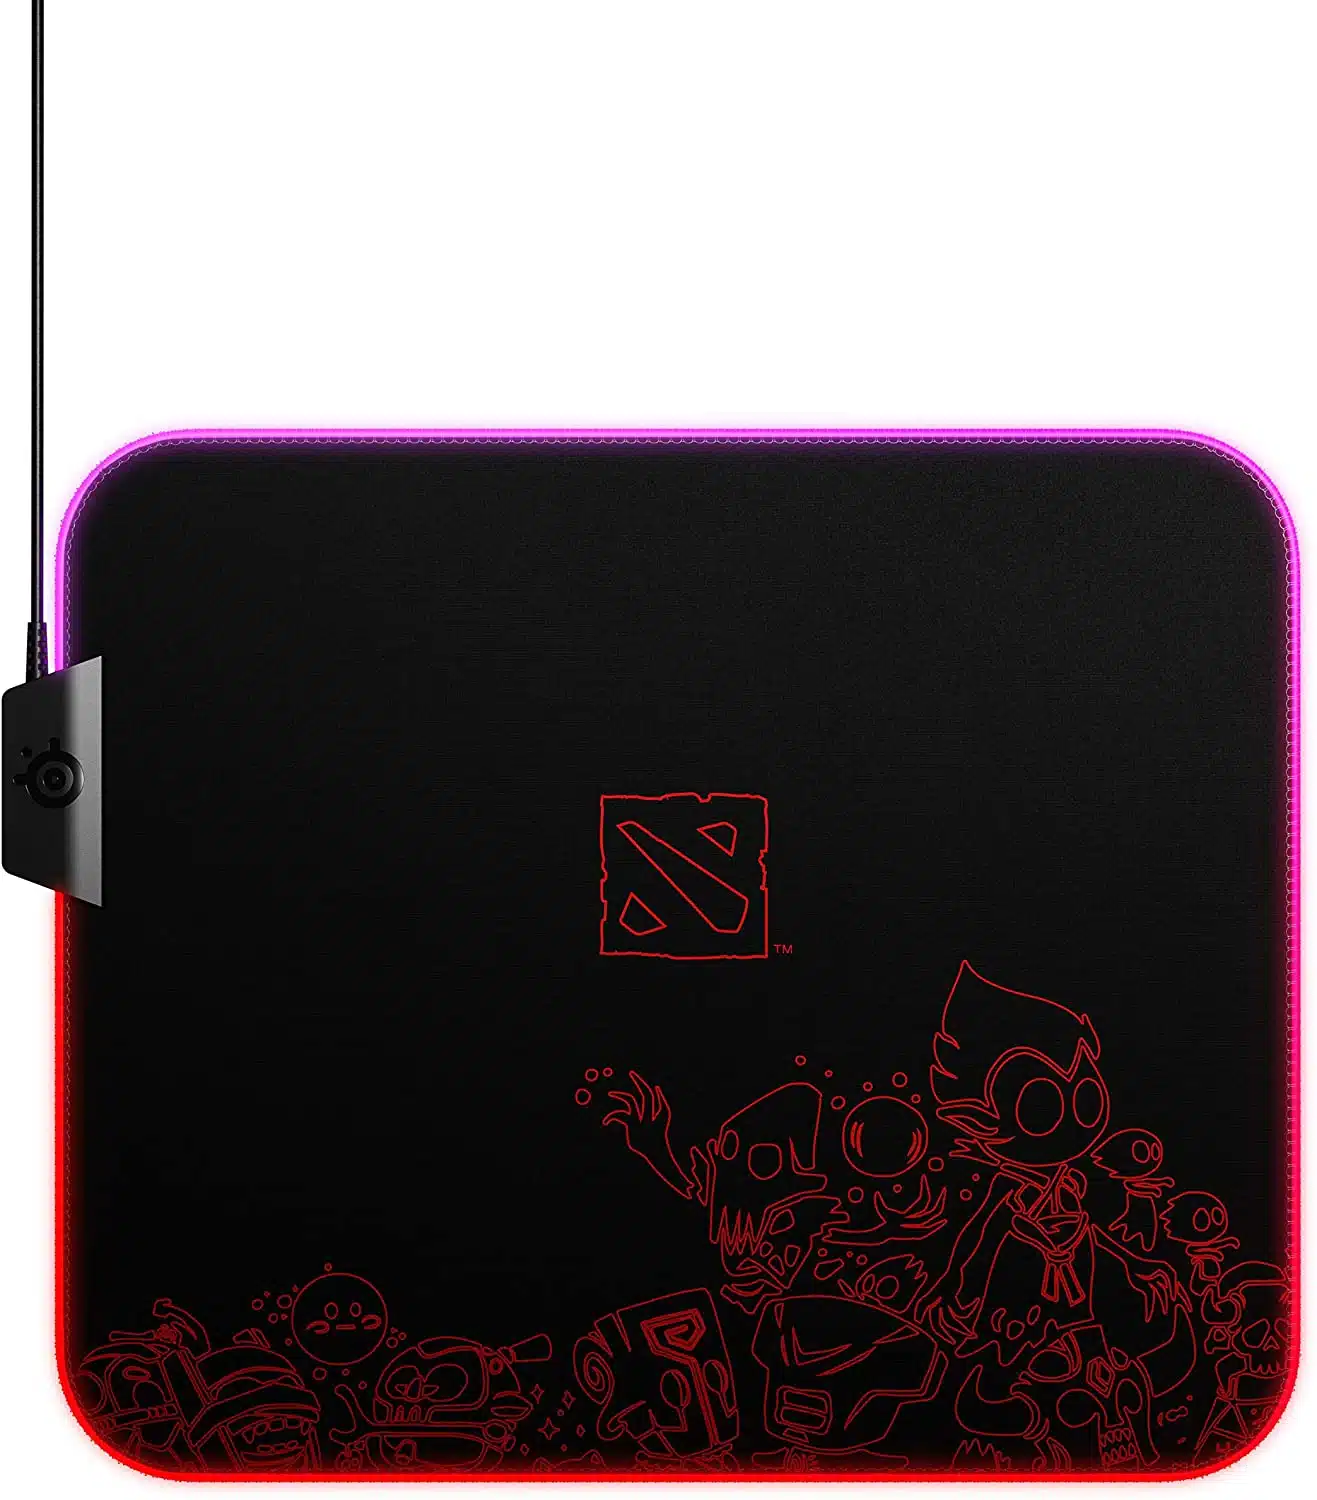 SteelSeries QcK Dota 2 Edition Gaming Surface - Medium RGB Prism Cloth  Mouse Pad of All Time - Optimized for Gaming Sensors